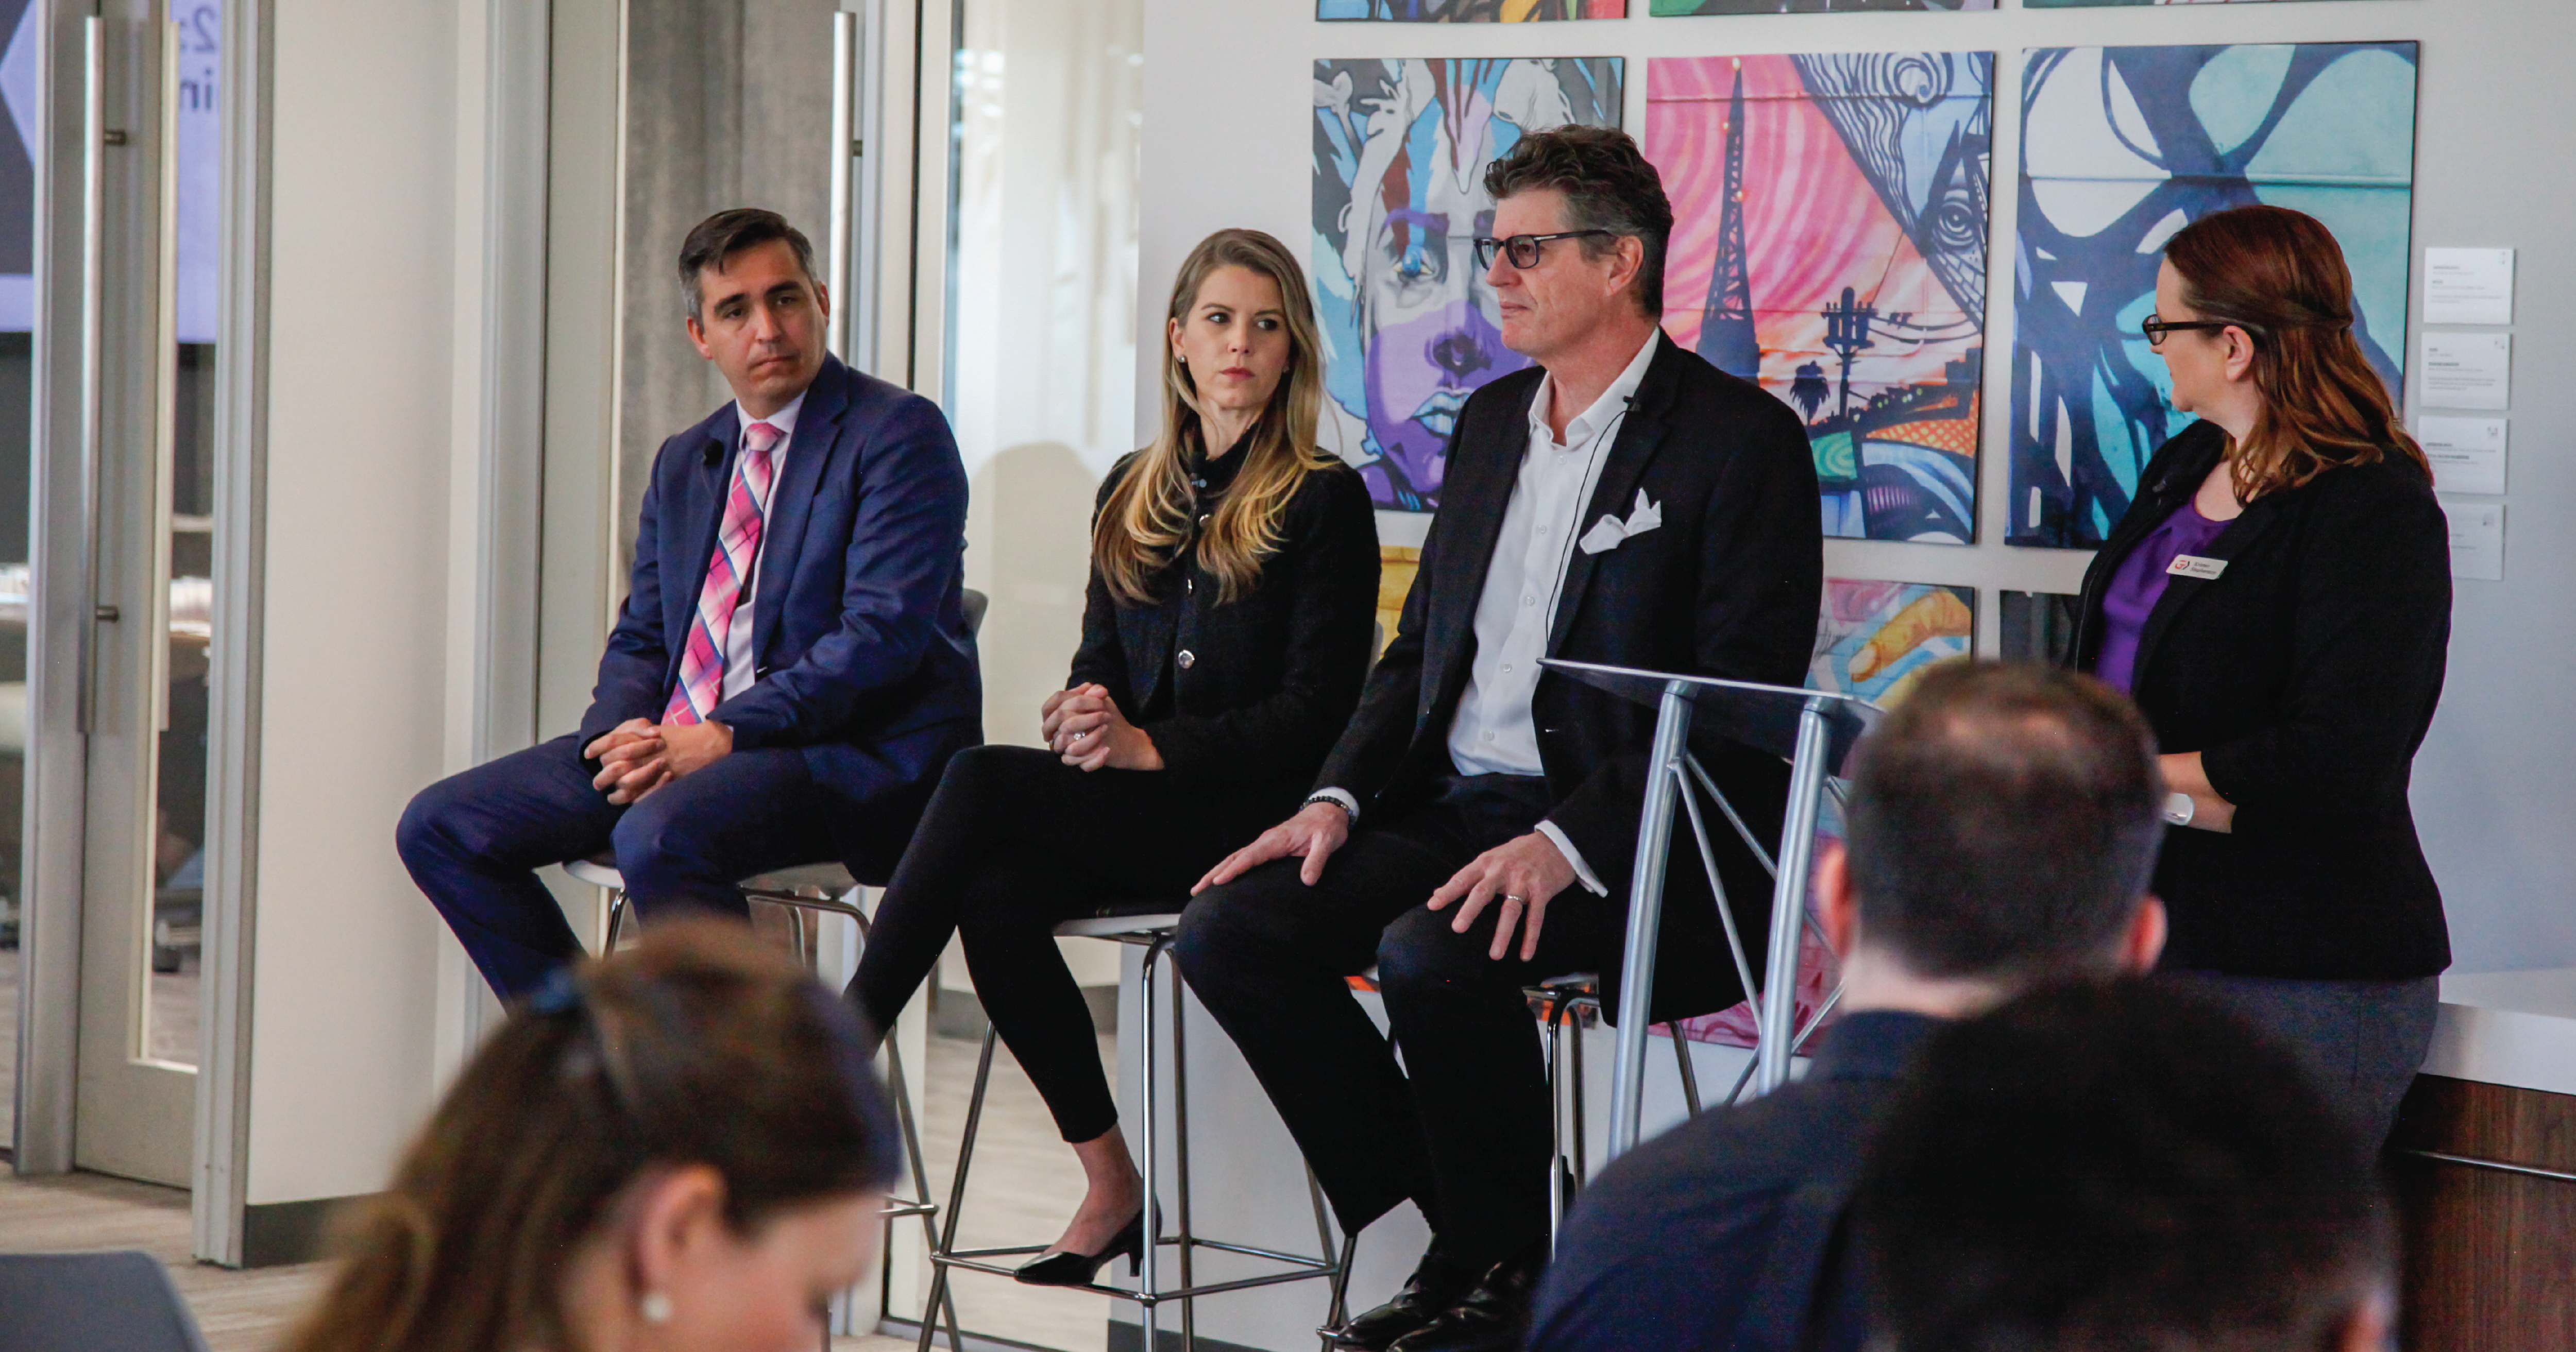 Economic development organizations, municipalities and others use data to drive business growth. Learn more about this from our Ambassador panelists.